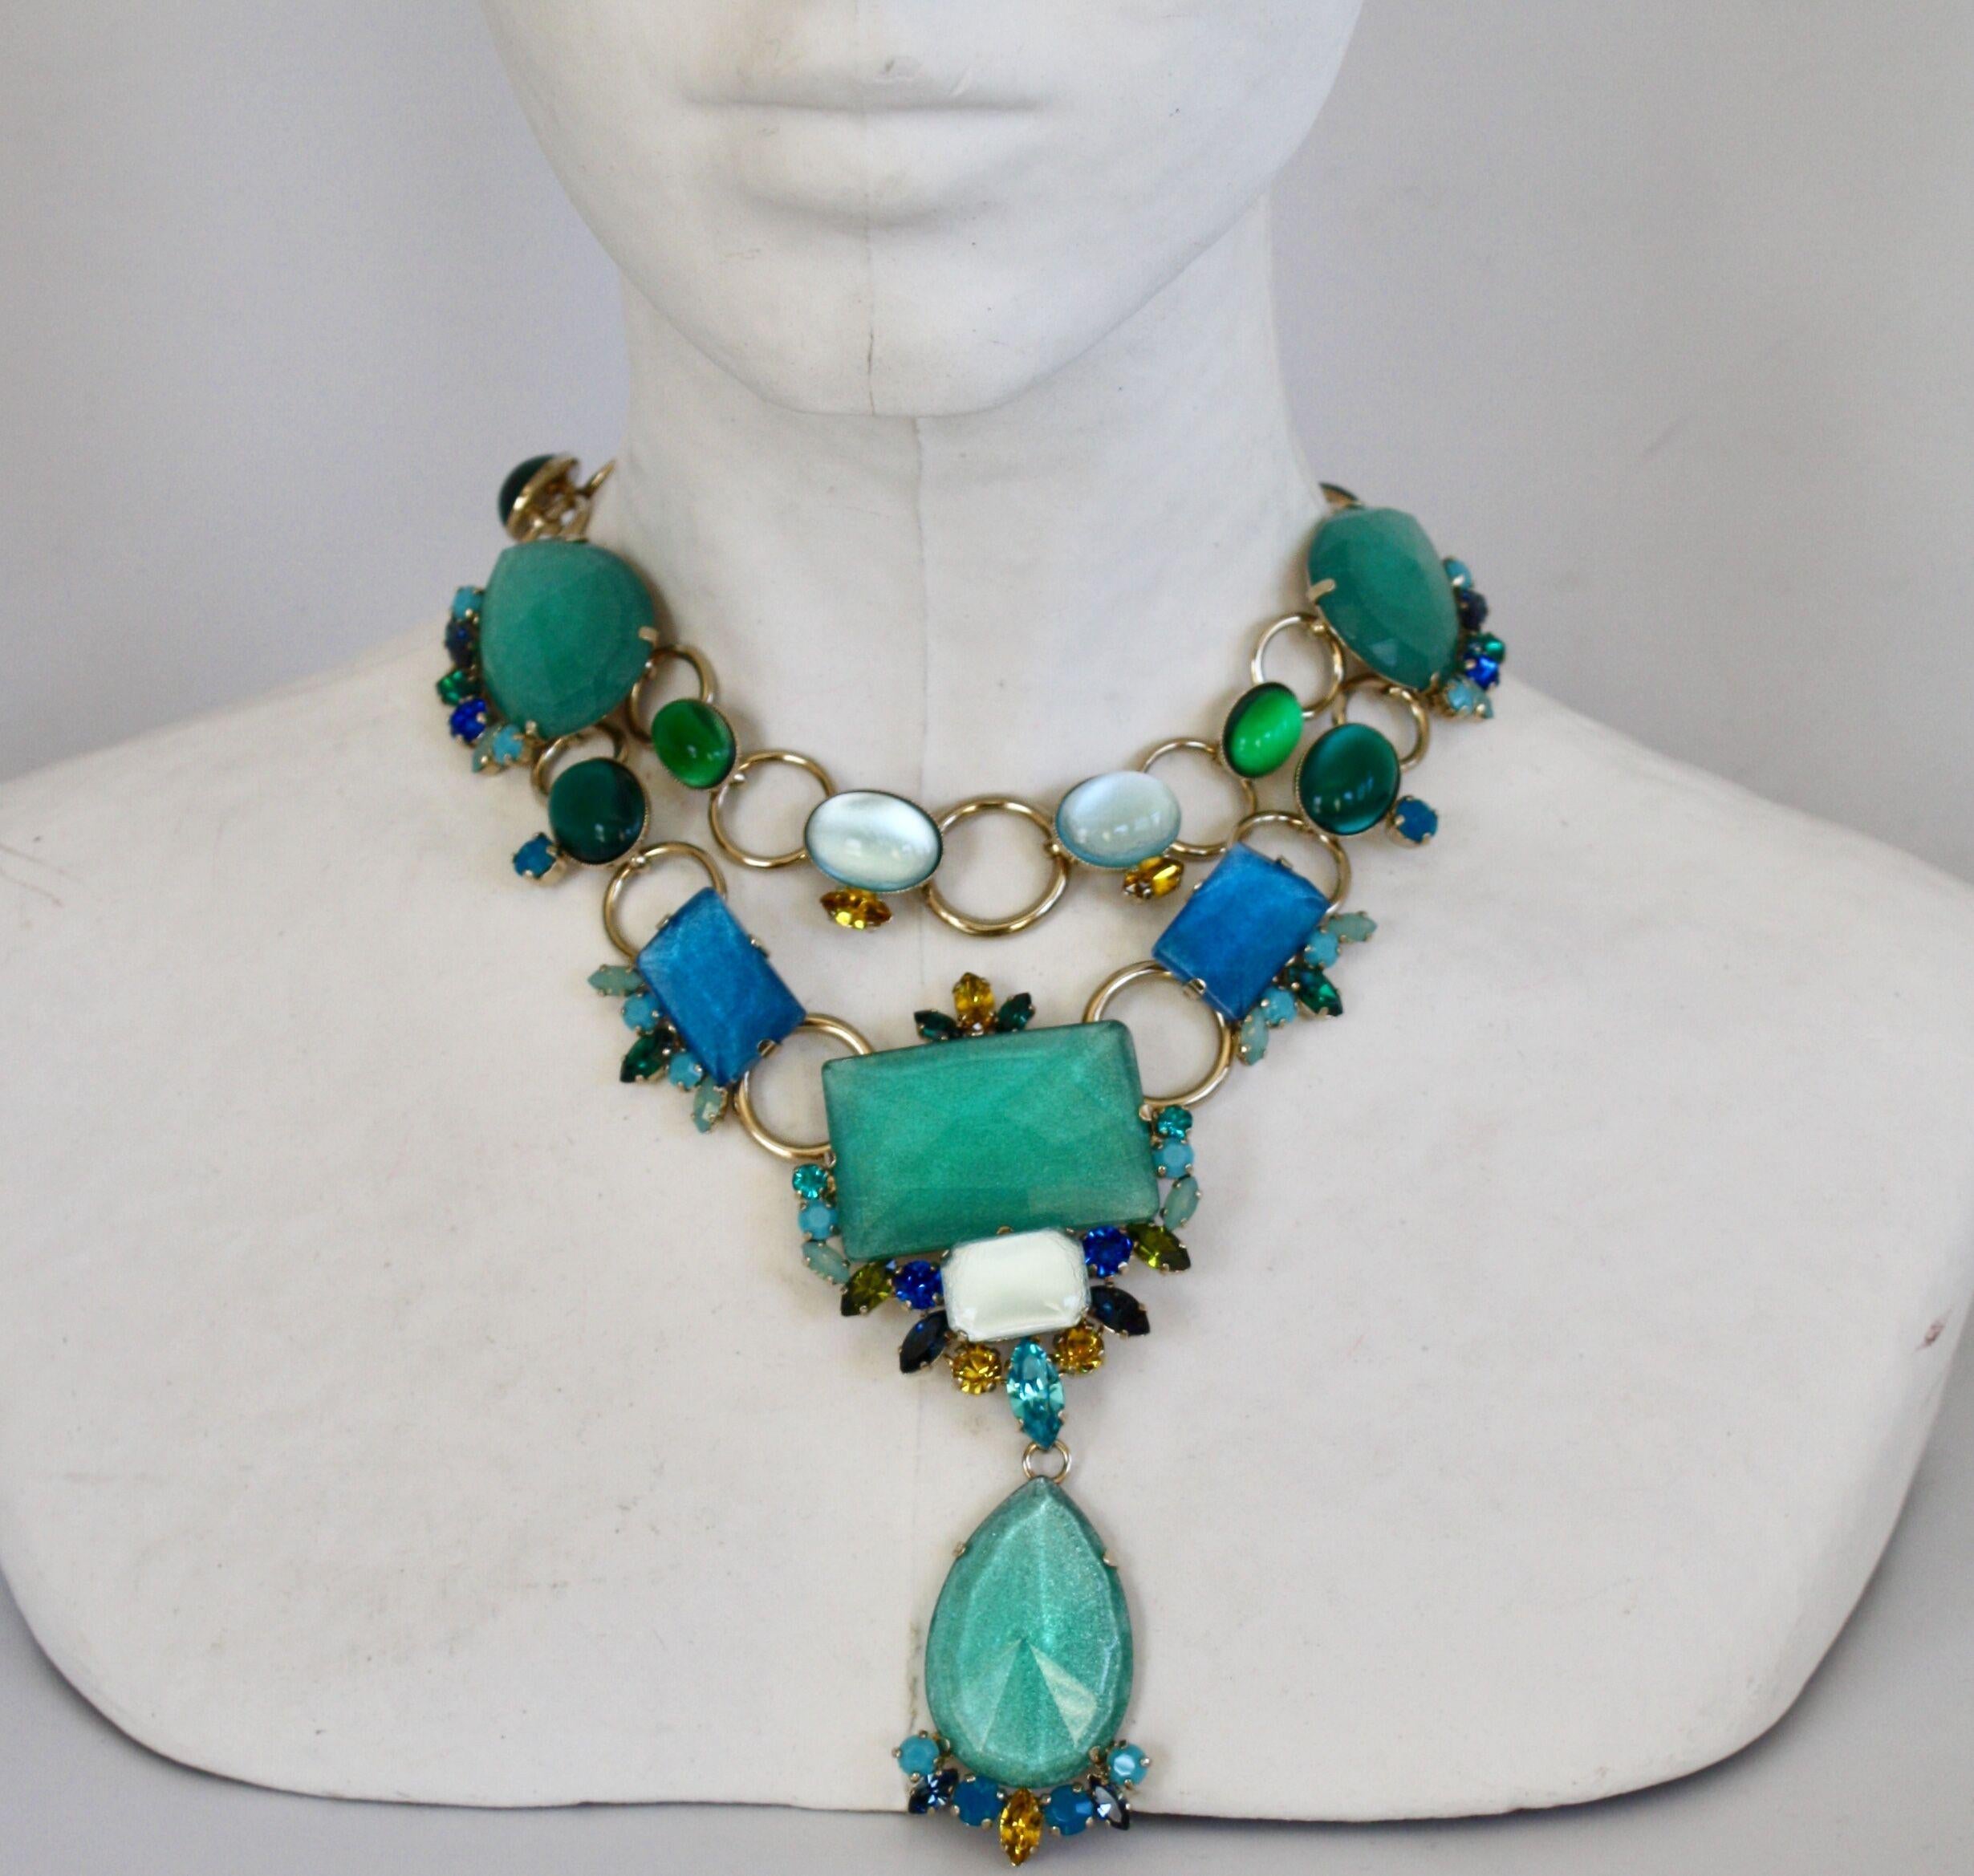 Statement necklace made from Swarovski Crystals and glass in shades of blue, aqua, and white. 

Drop is 4